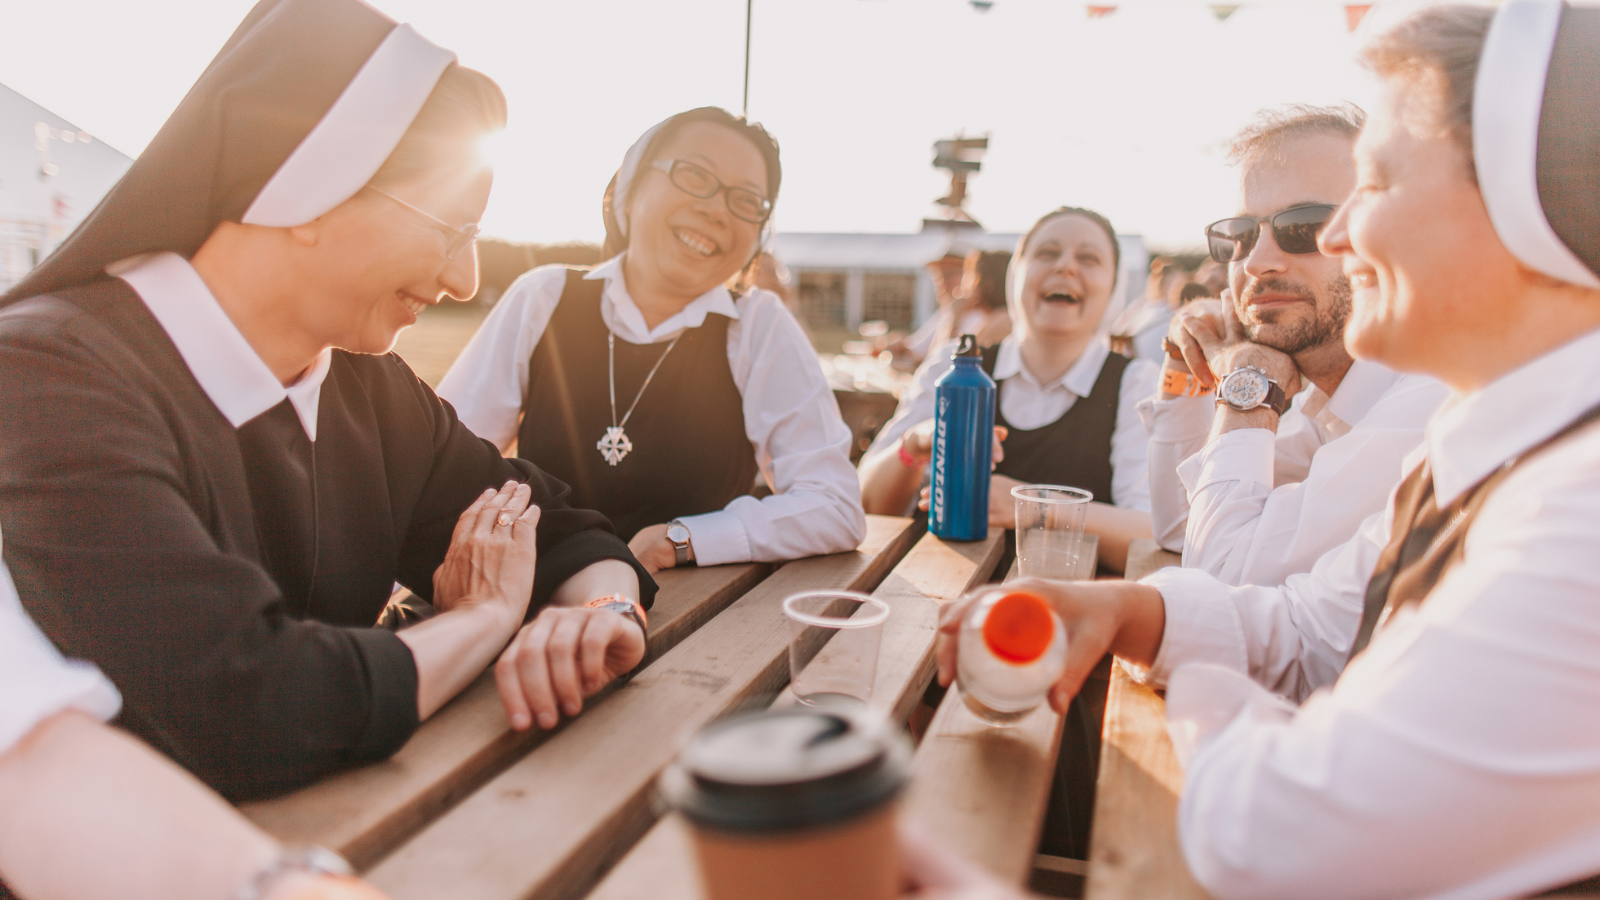 A group of nuns sitting at a table.